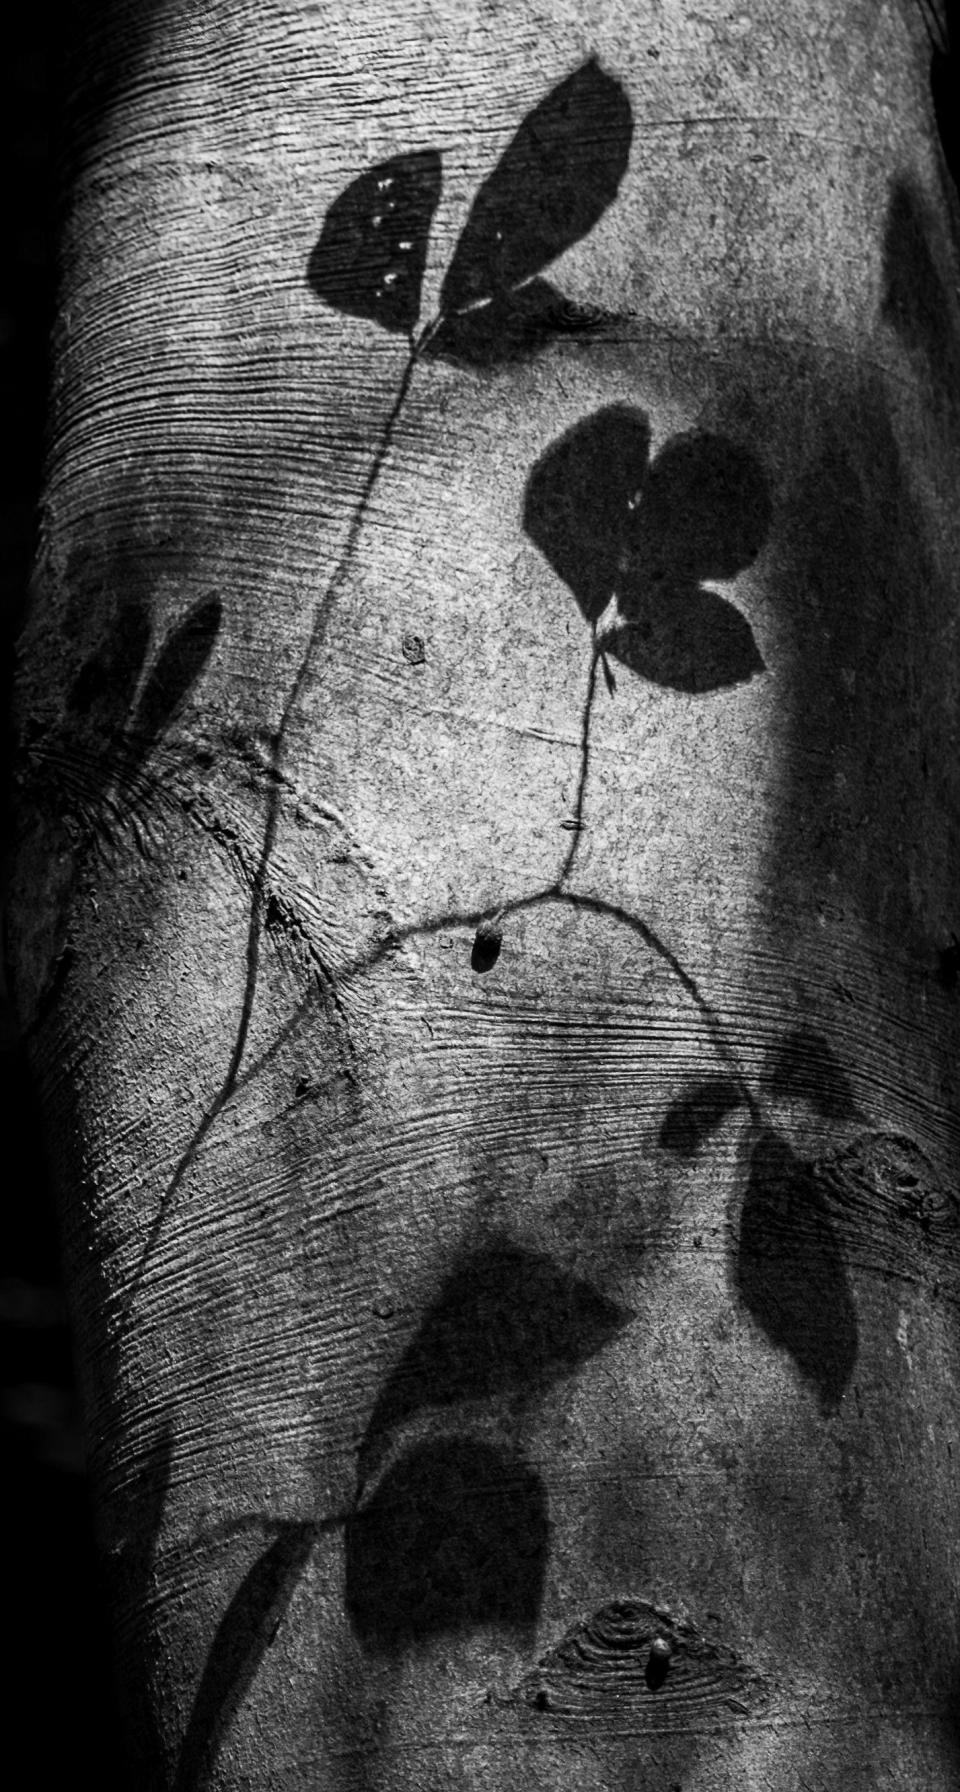 Shadows created by leaves on the trunk of a tree